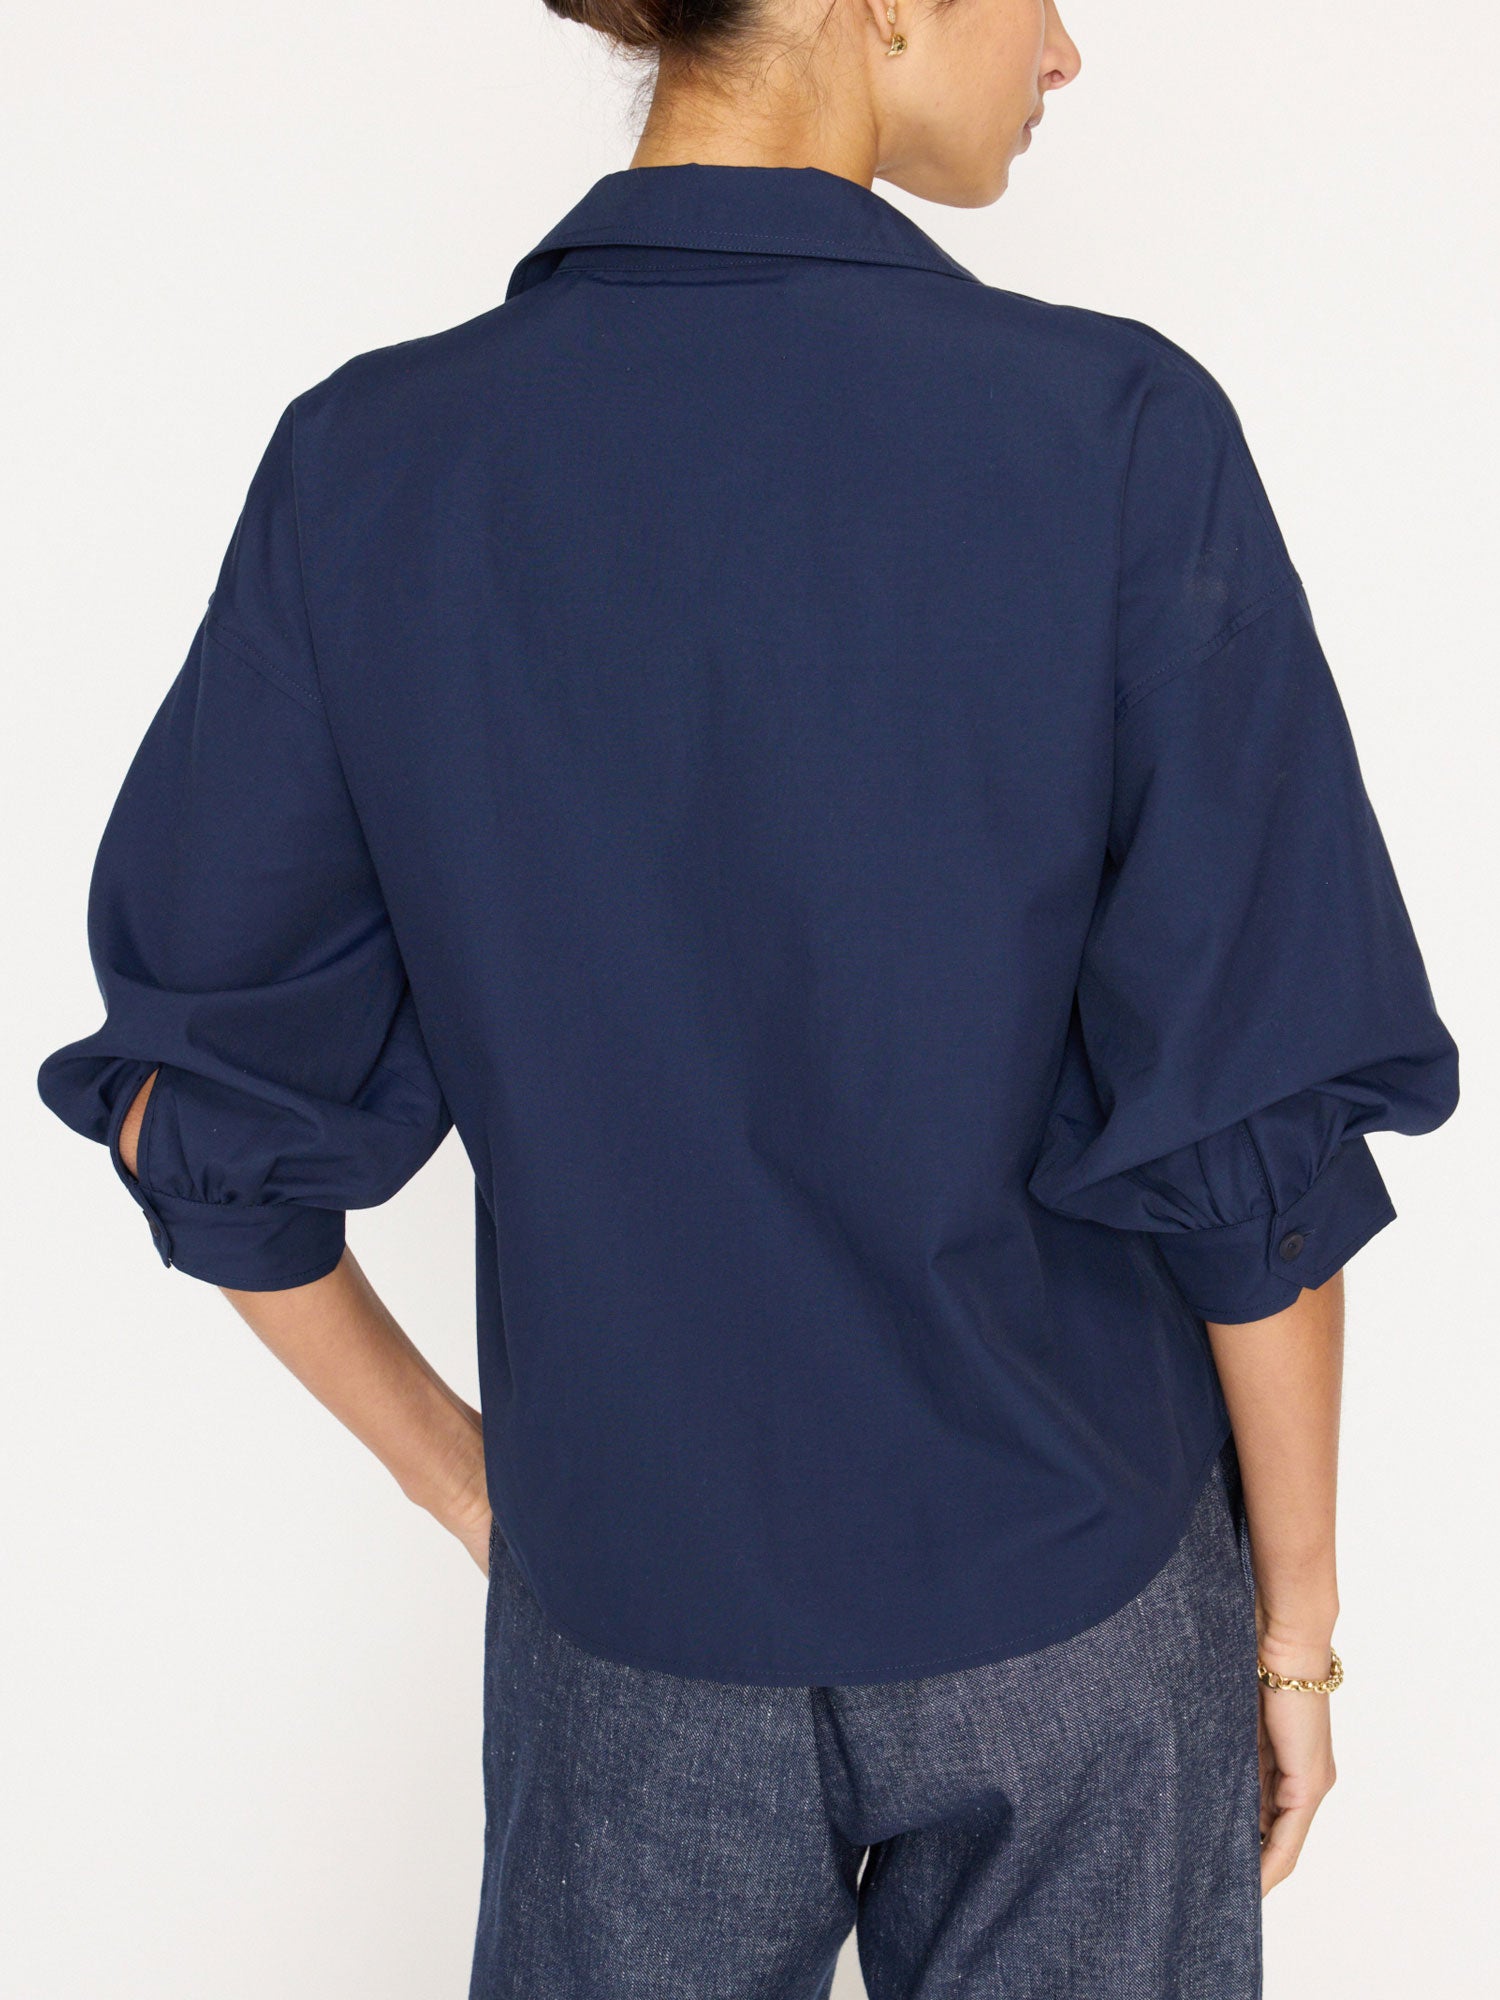 Kate V-neck button up navy shirt back view